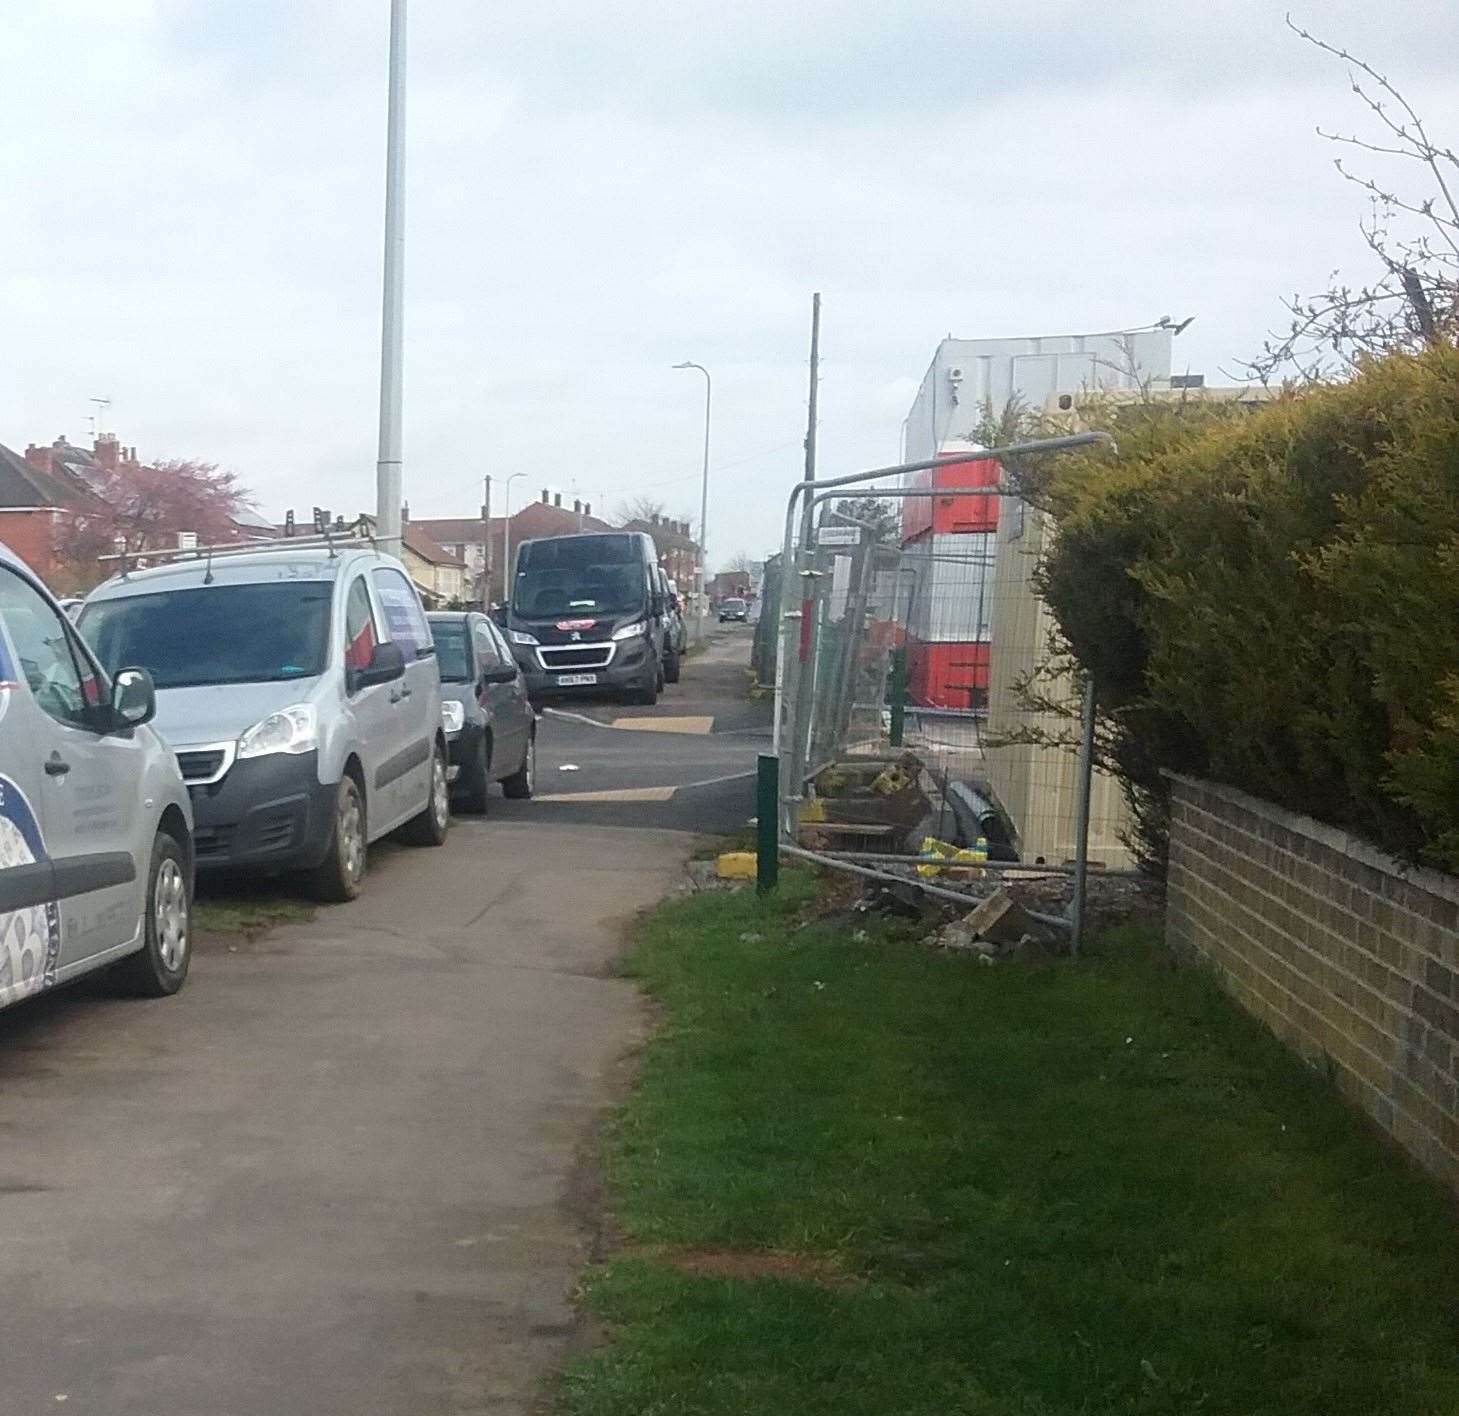 Cars and vans parked on New Beacon Road pavement